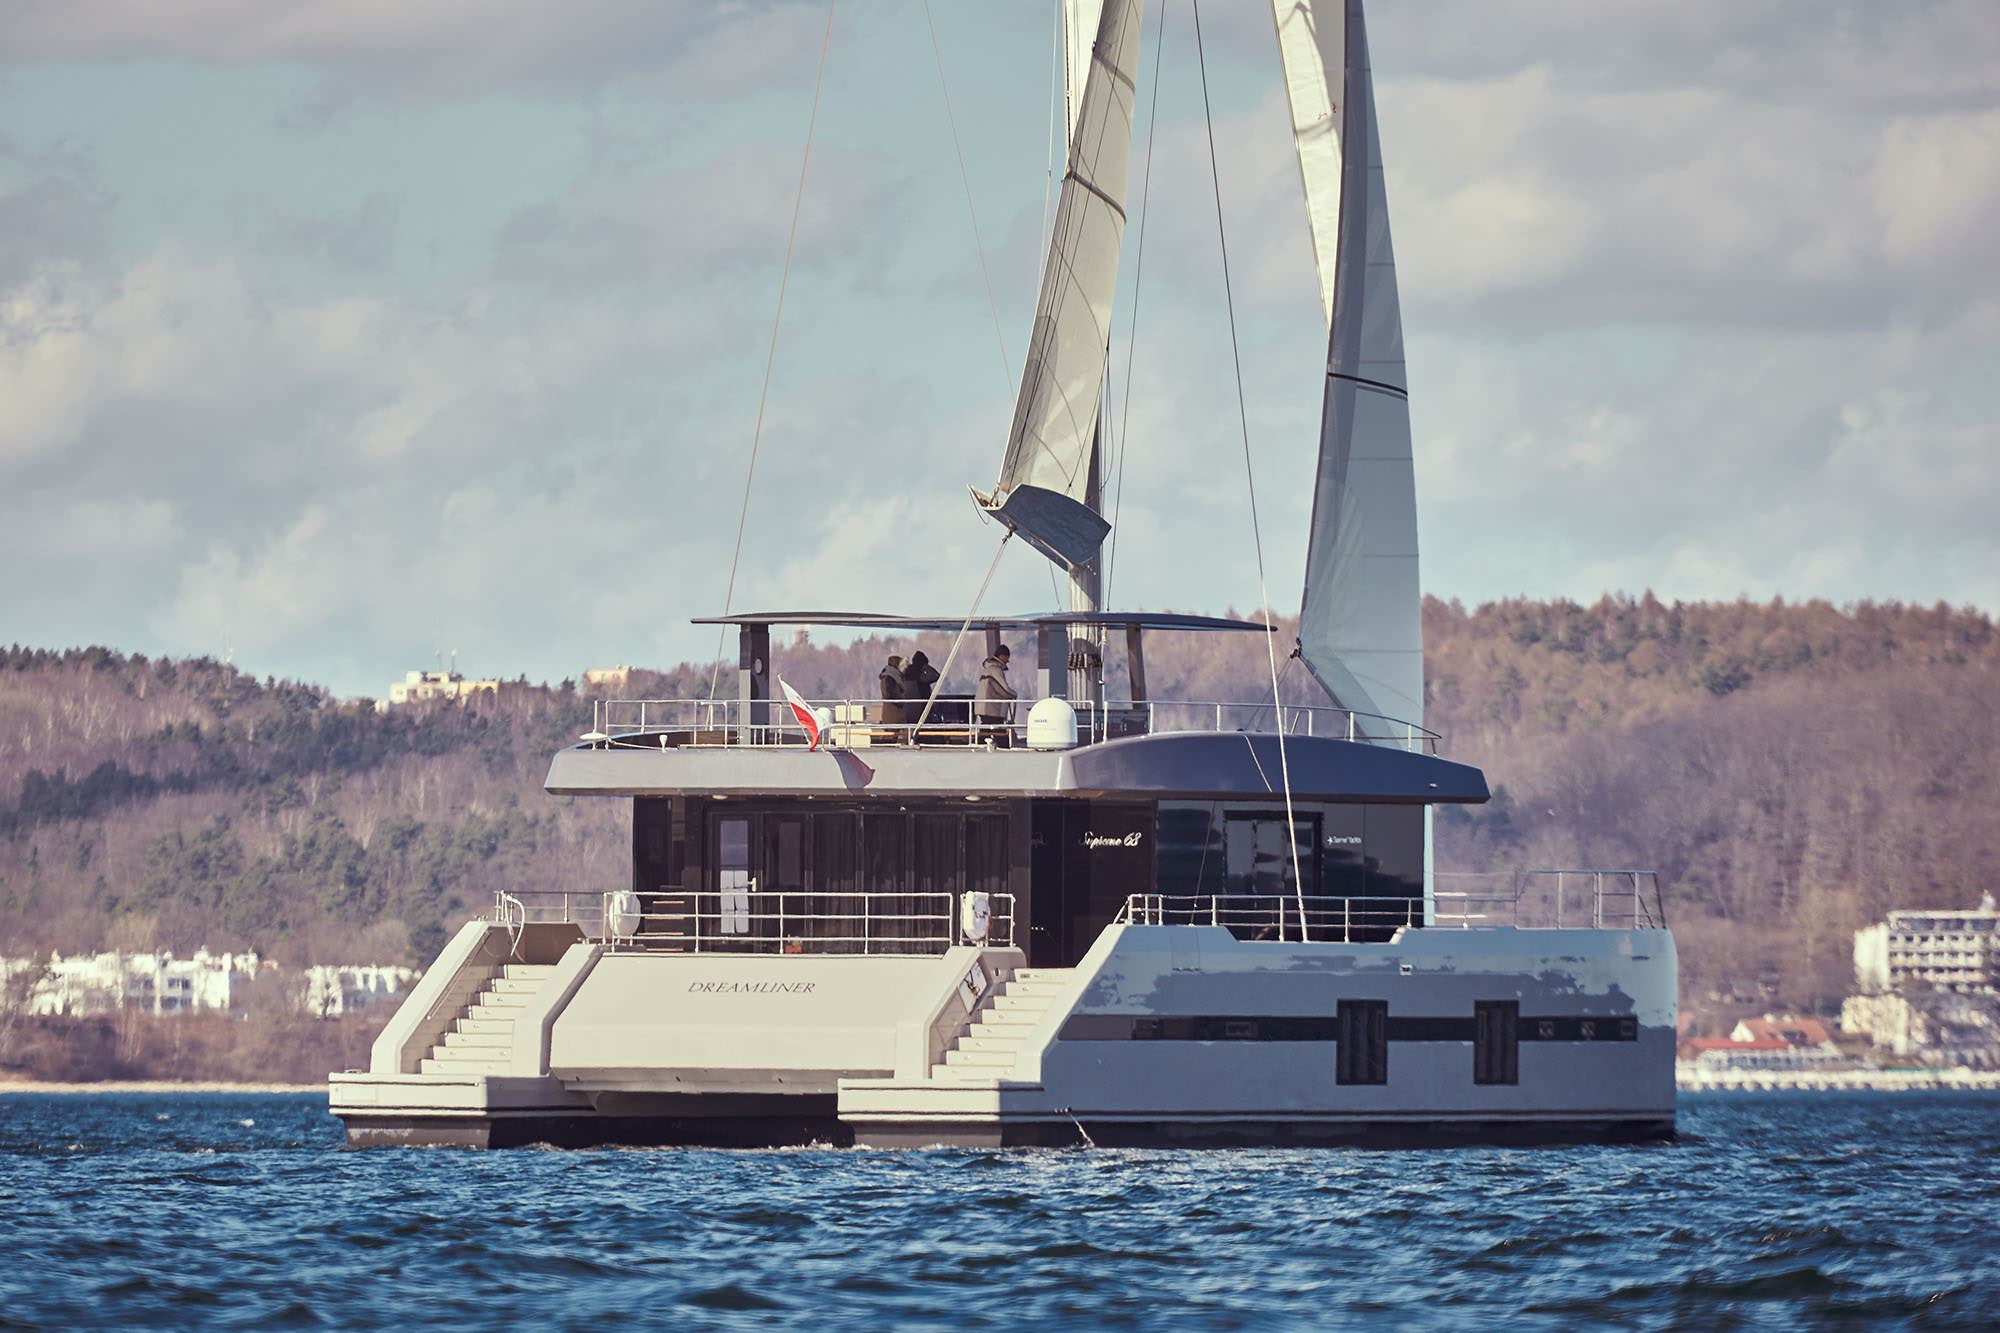 Launched Sail Catamaran for Sale  Sunreef Supreme 68-S Boat Highlights